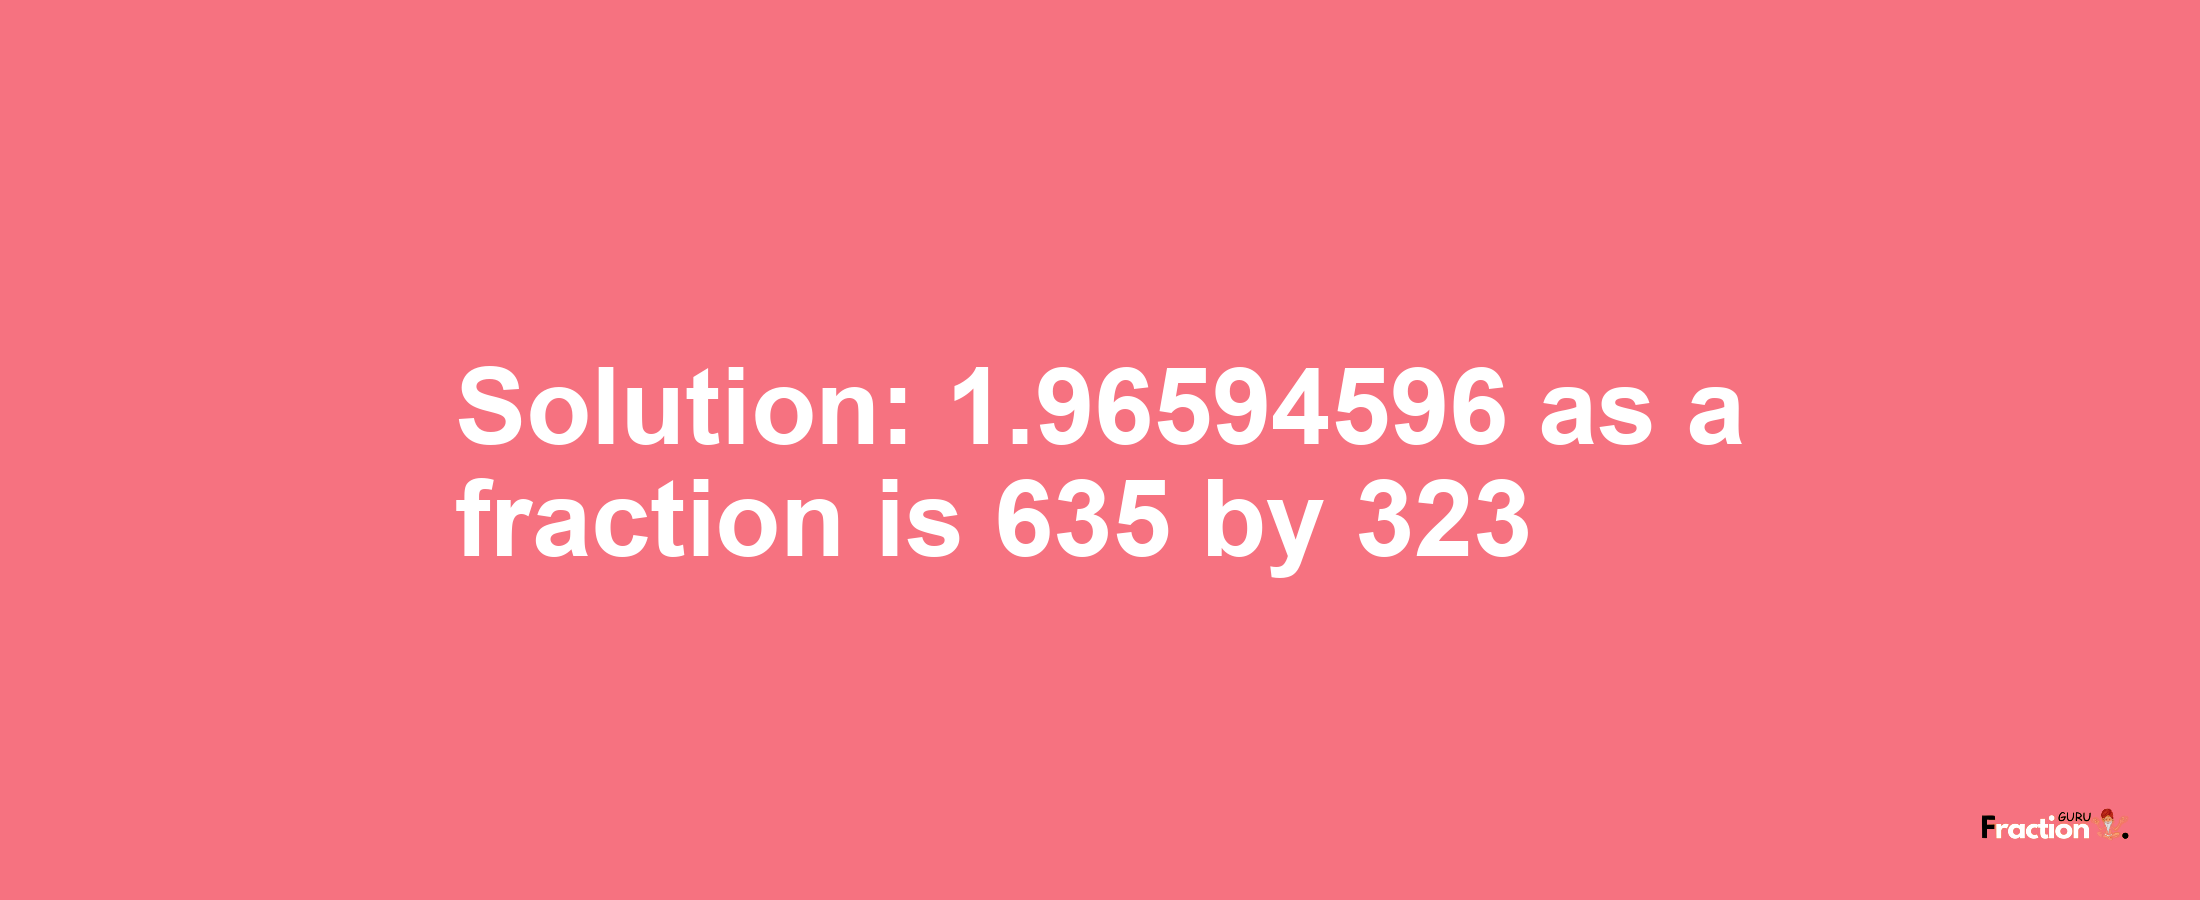 Solution:1.96594596 as a fraction is 635/323